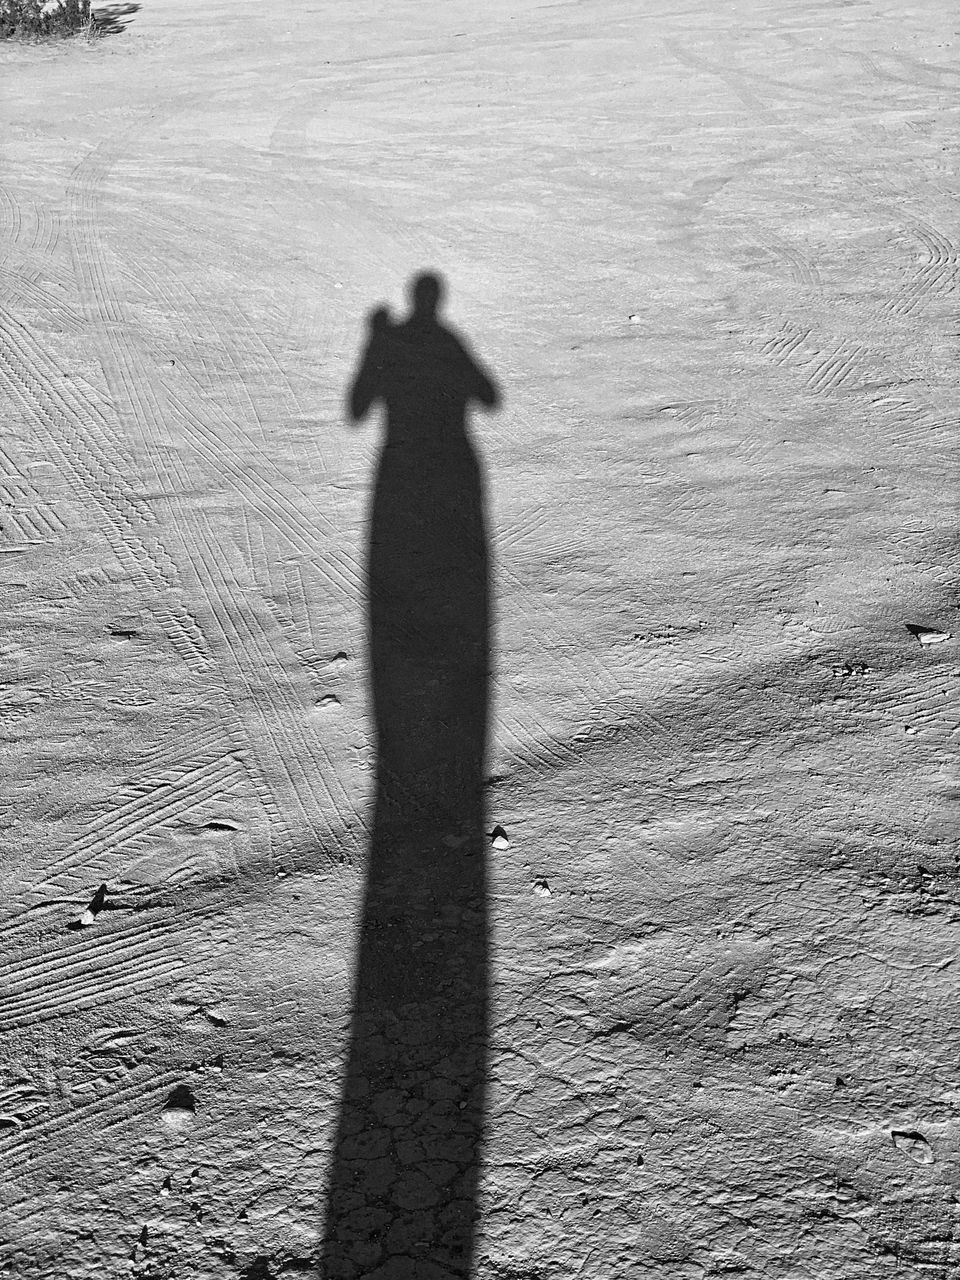 SHADOW OF PERSON ON SAND ON BEACH